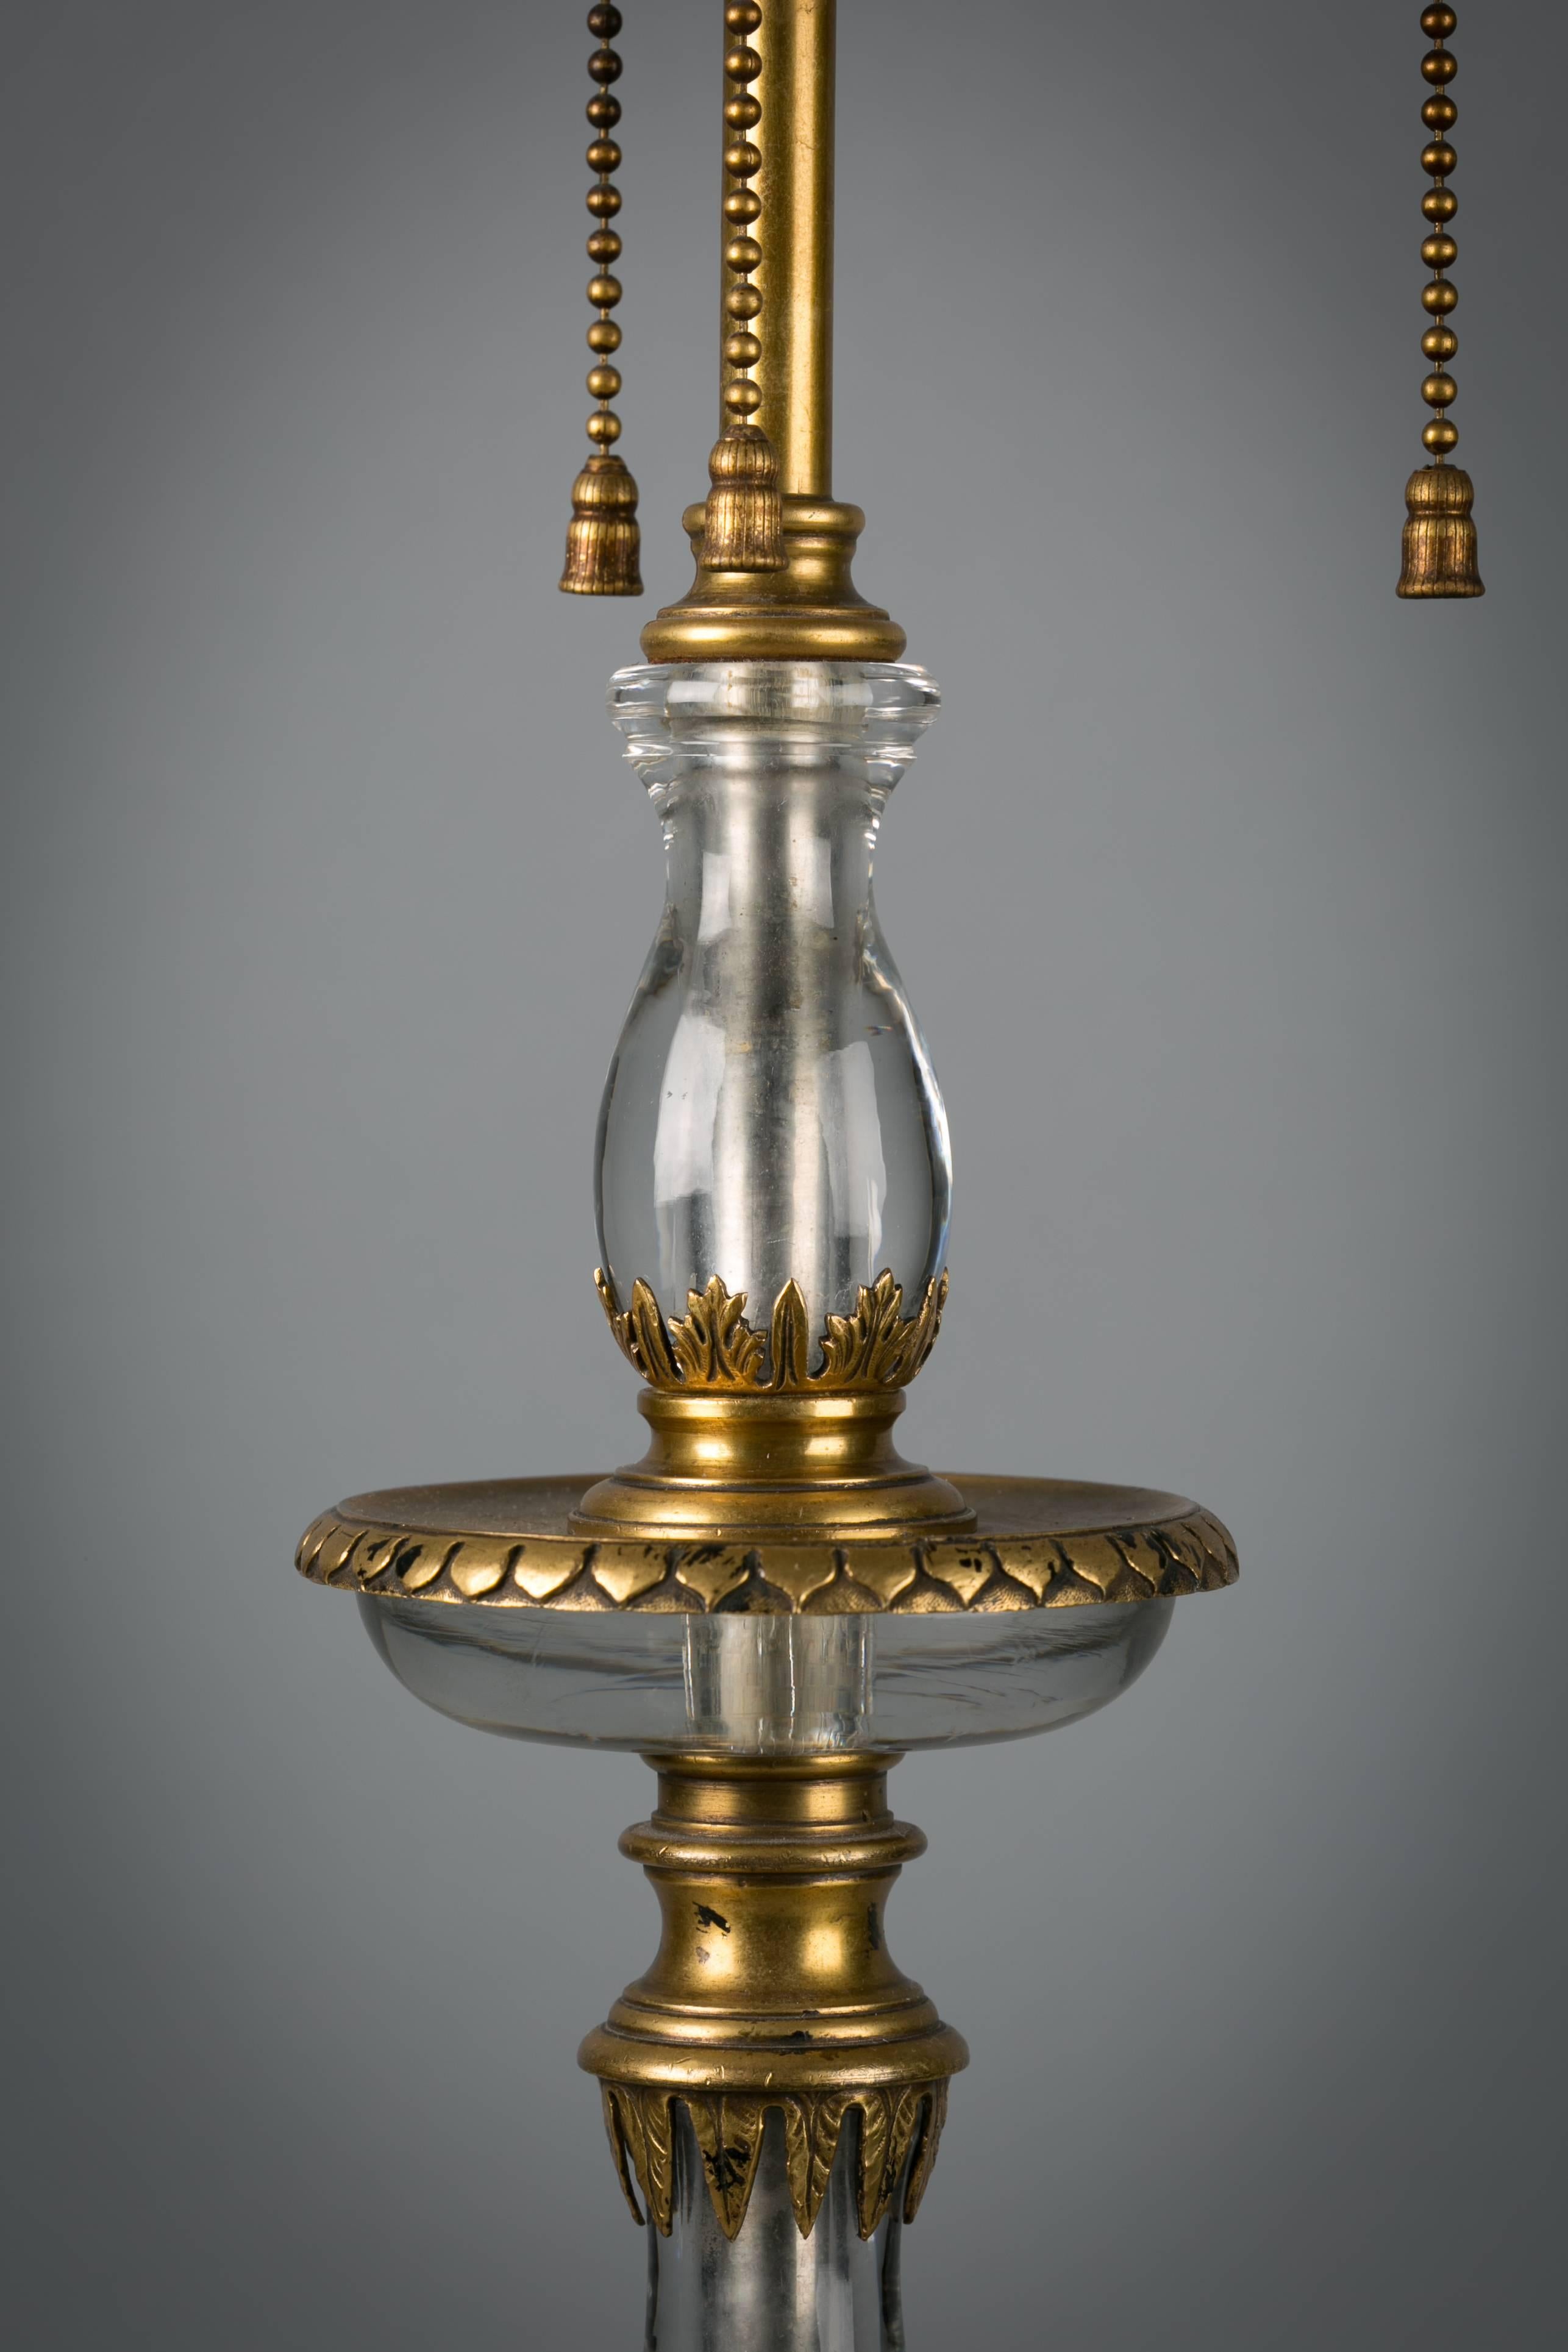 American bronze and rock crystal lamp, circa 1900. Made by E.F. Caldwell & Co.